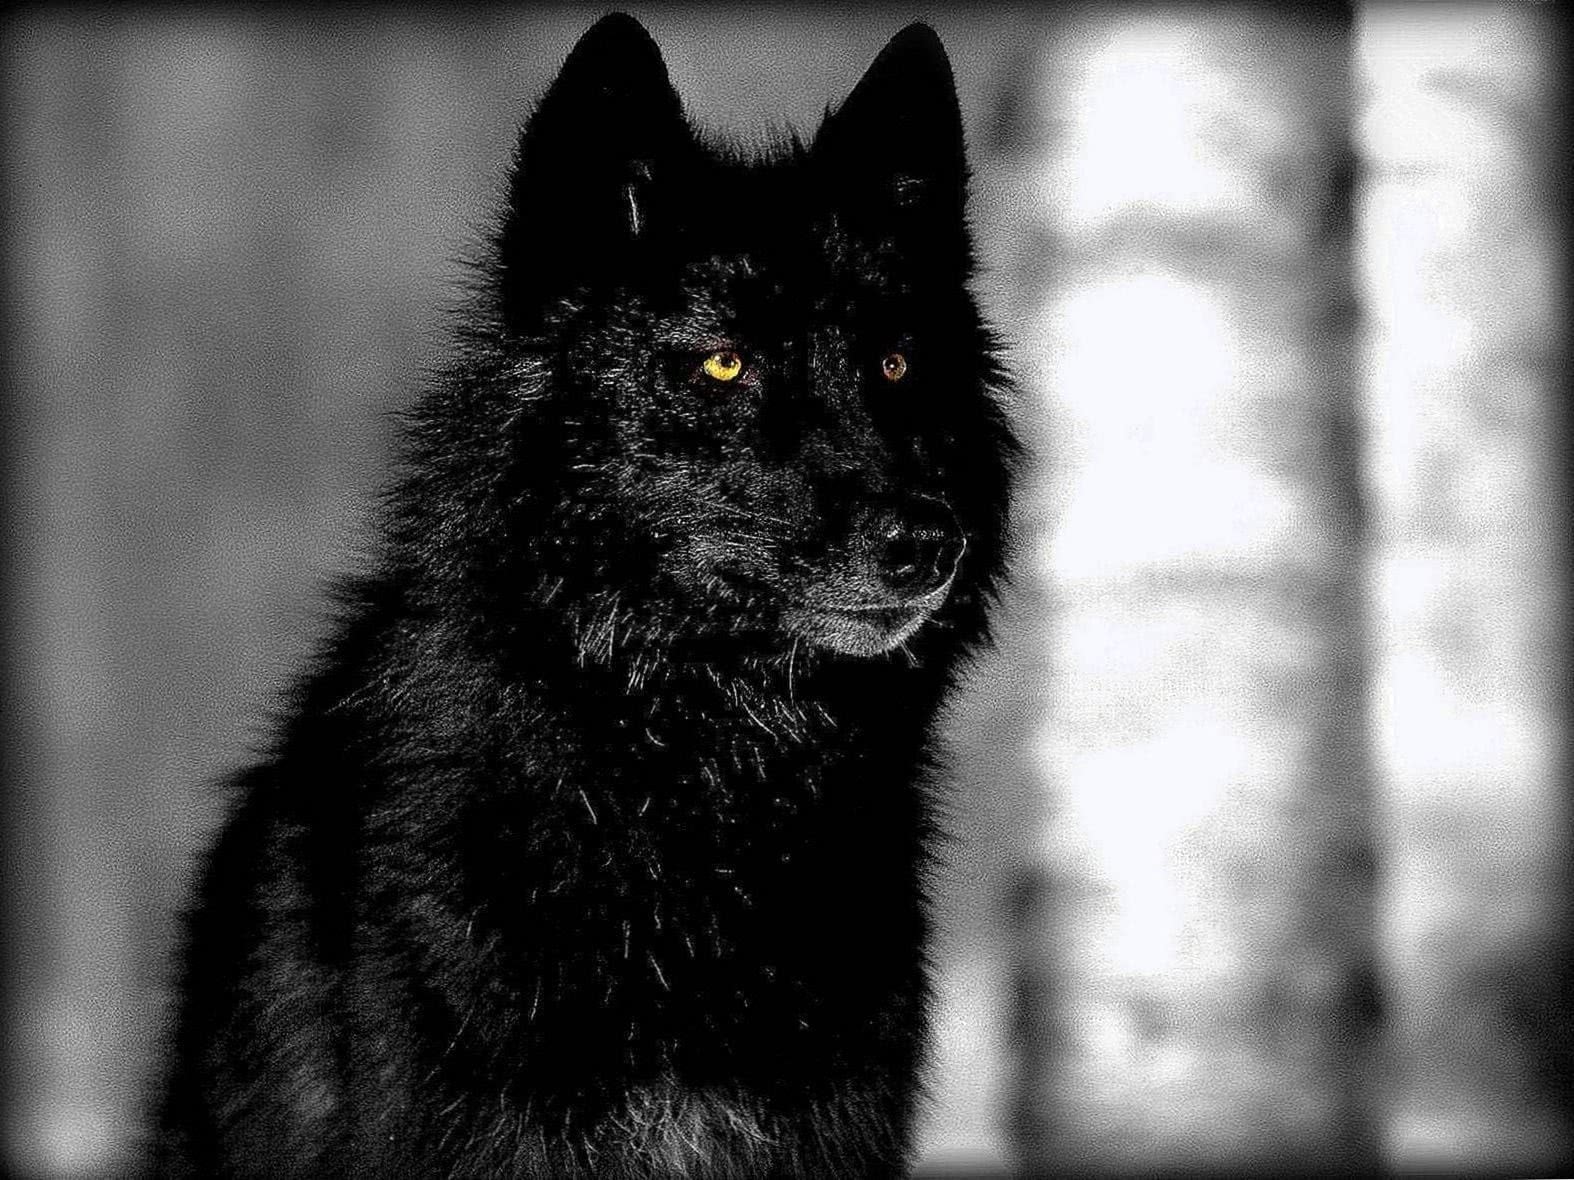 Black Wolf Wallpapers Full HD